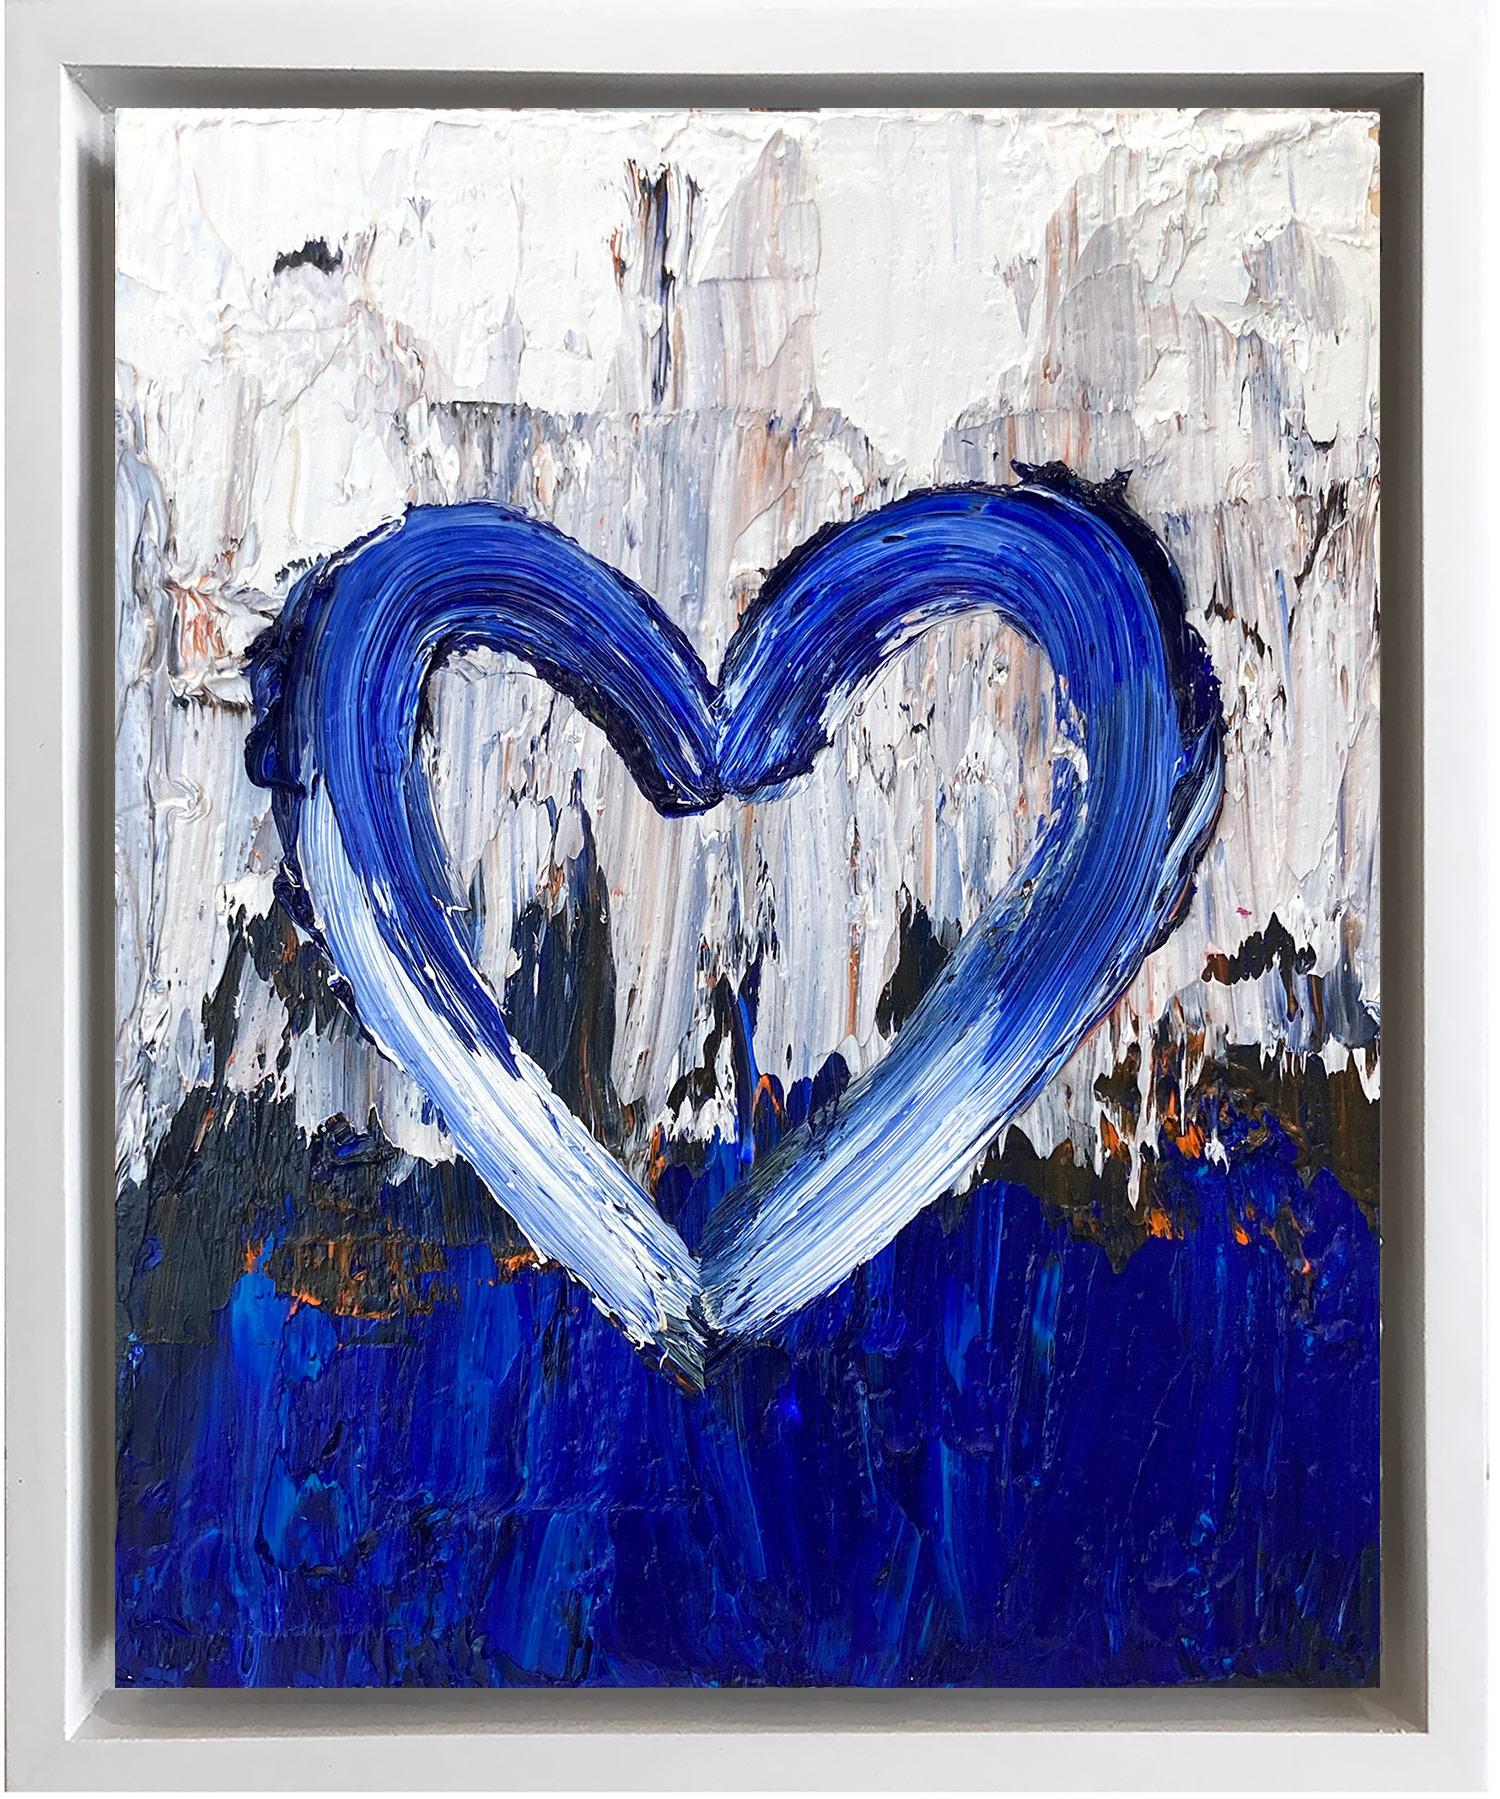 Cindy Shaoul Figurative Painting - "My Aspen Heart" Contemporary Oil Painting with Floater Frame 